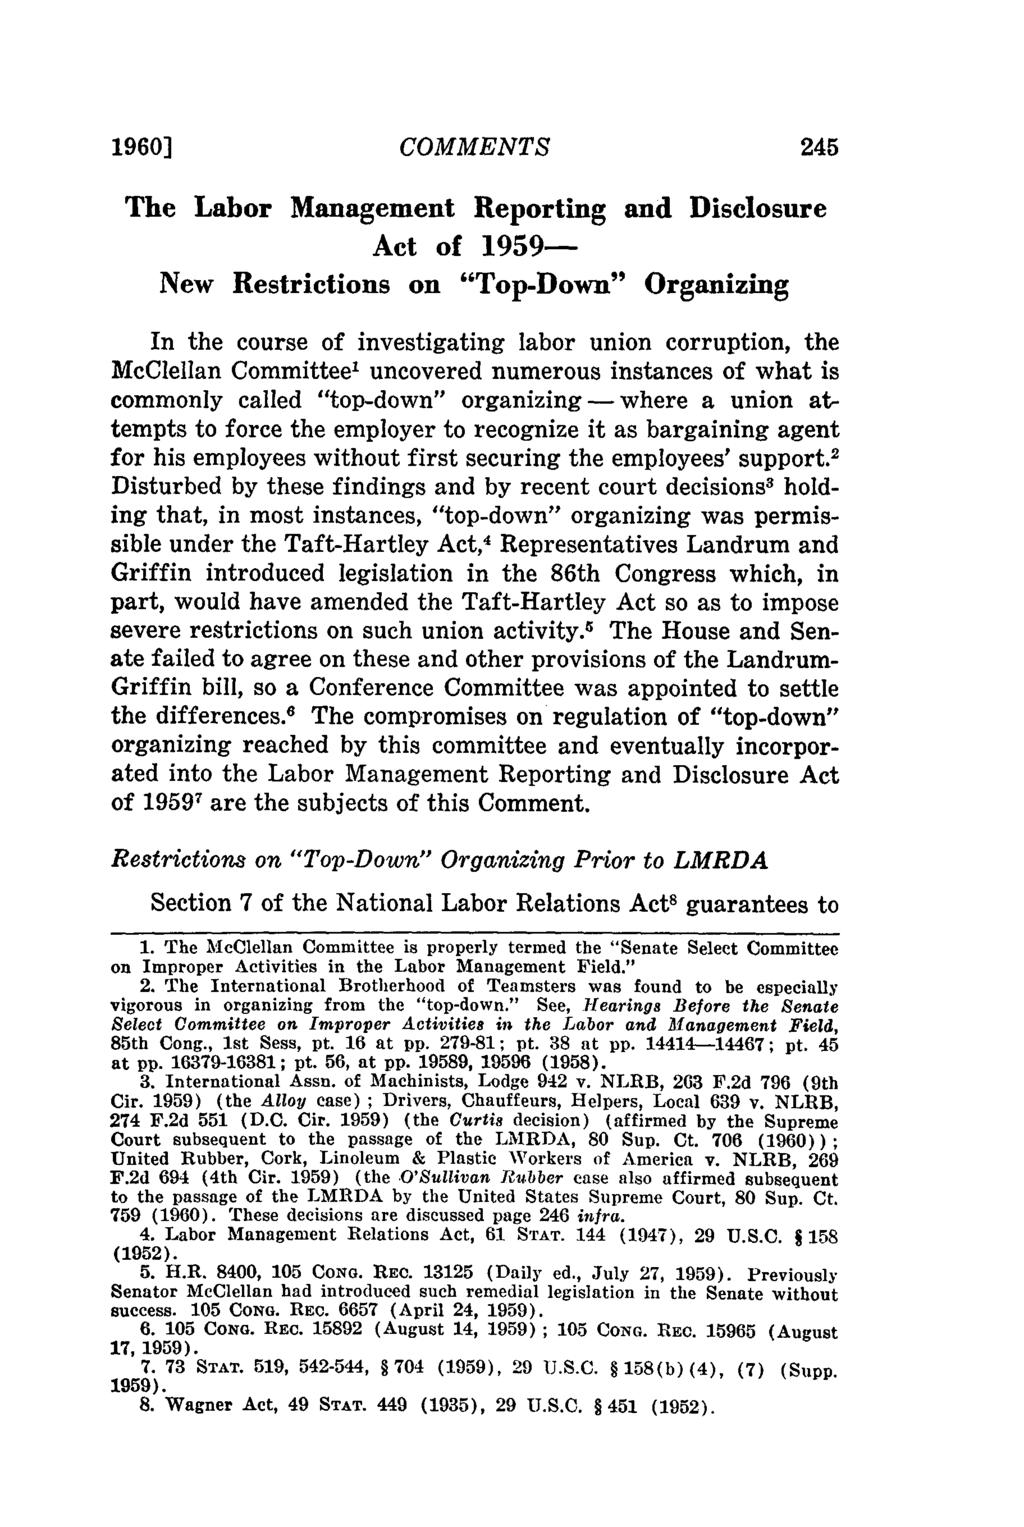 1960] COMMENTS The Labor Management Reporting and Disclosure Act of 1959- New Restrictions on "Top-Down" Organizing In the course of investigating labor union corruption, the McClellan Committee'